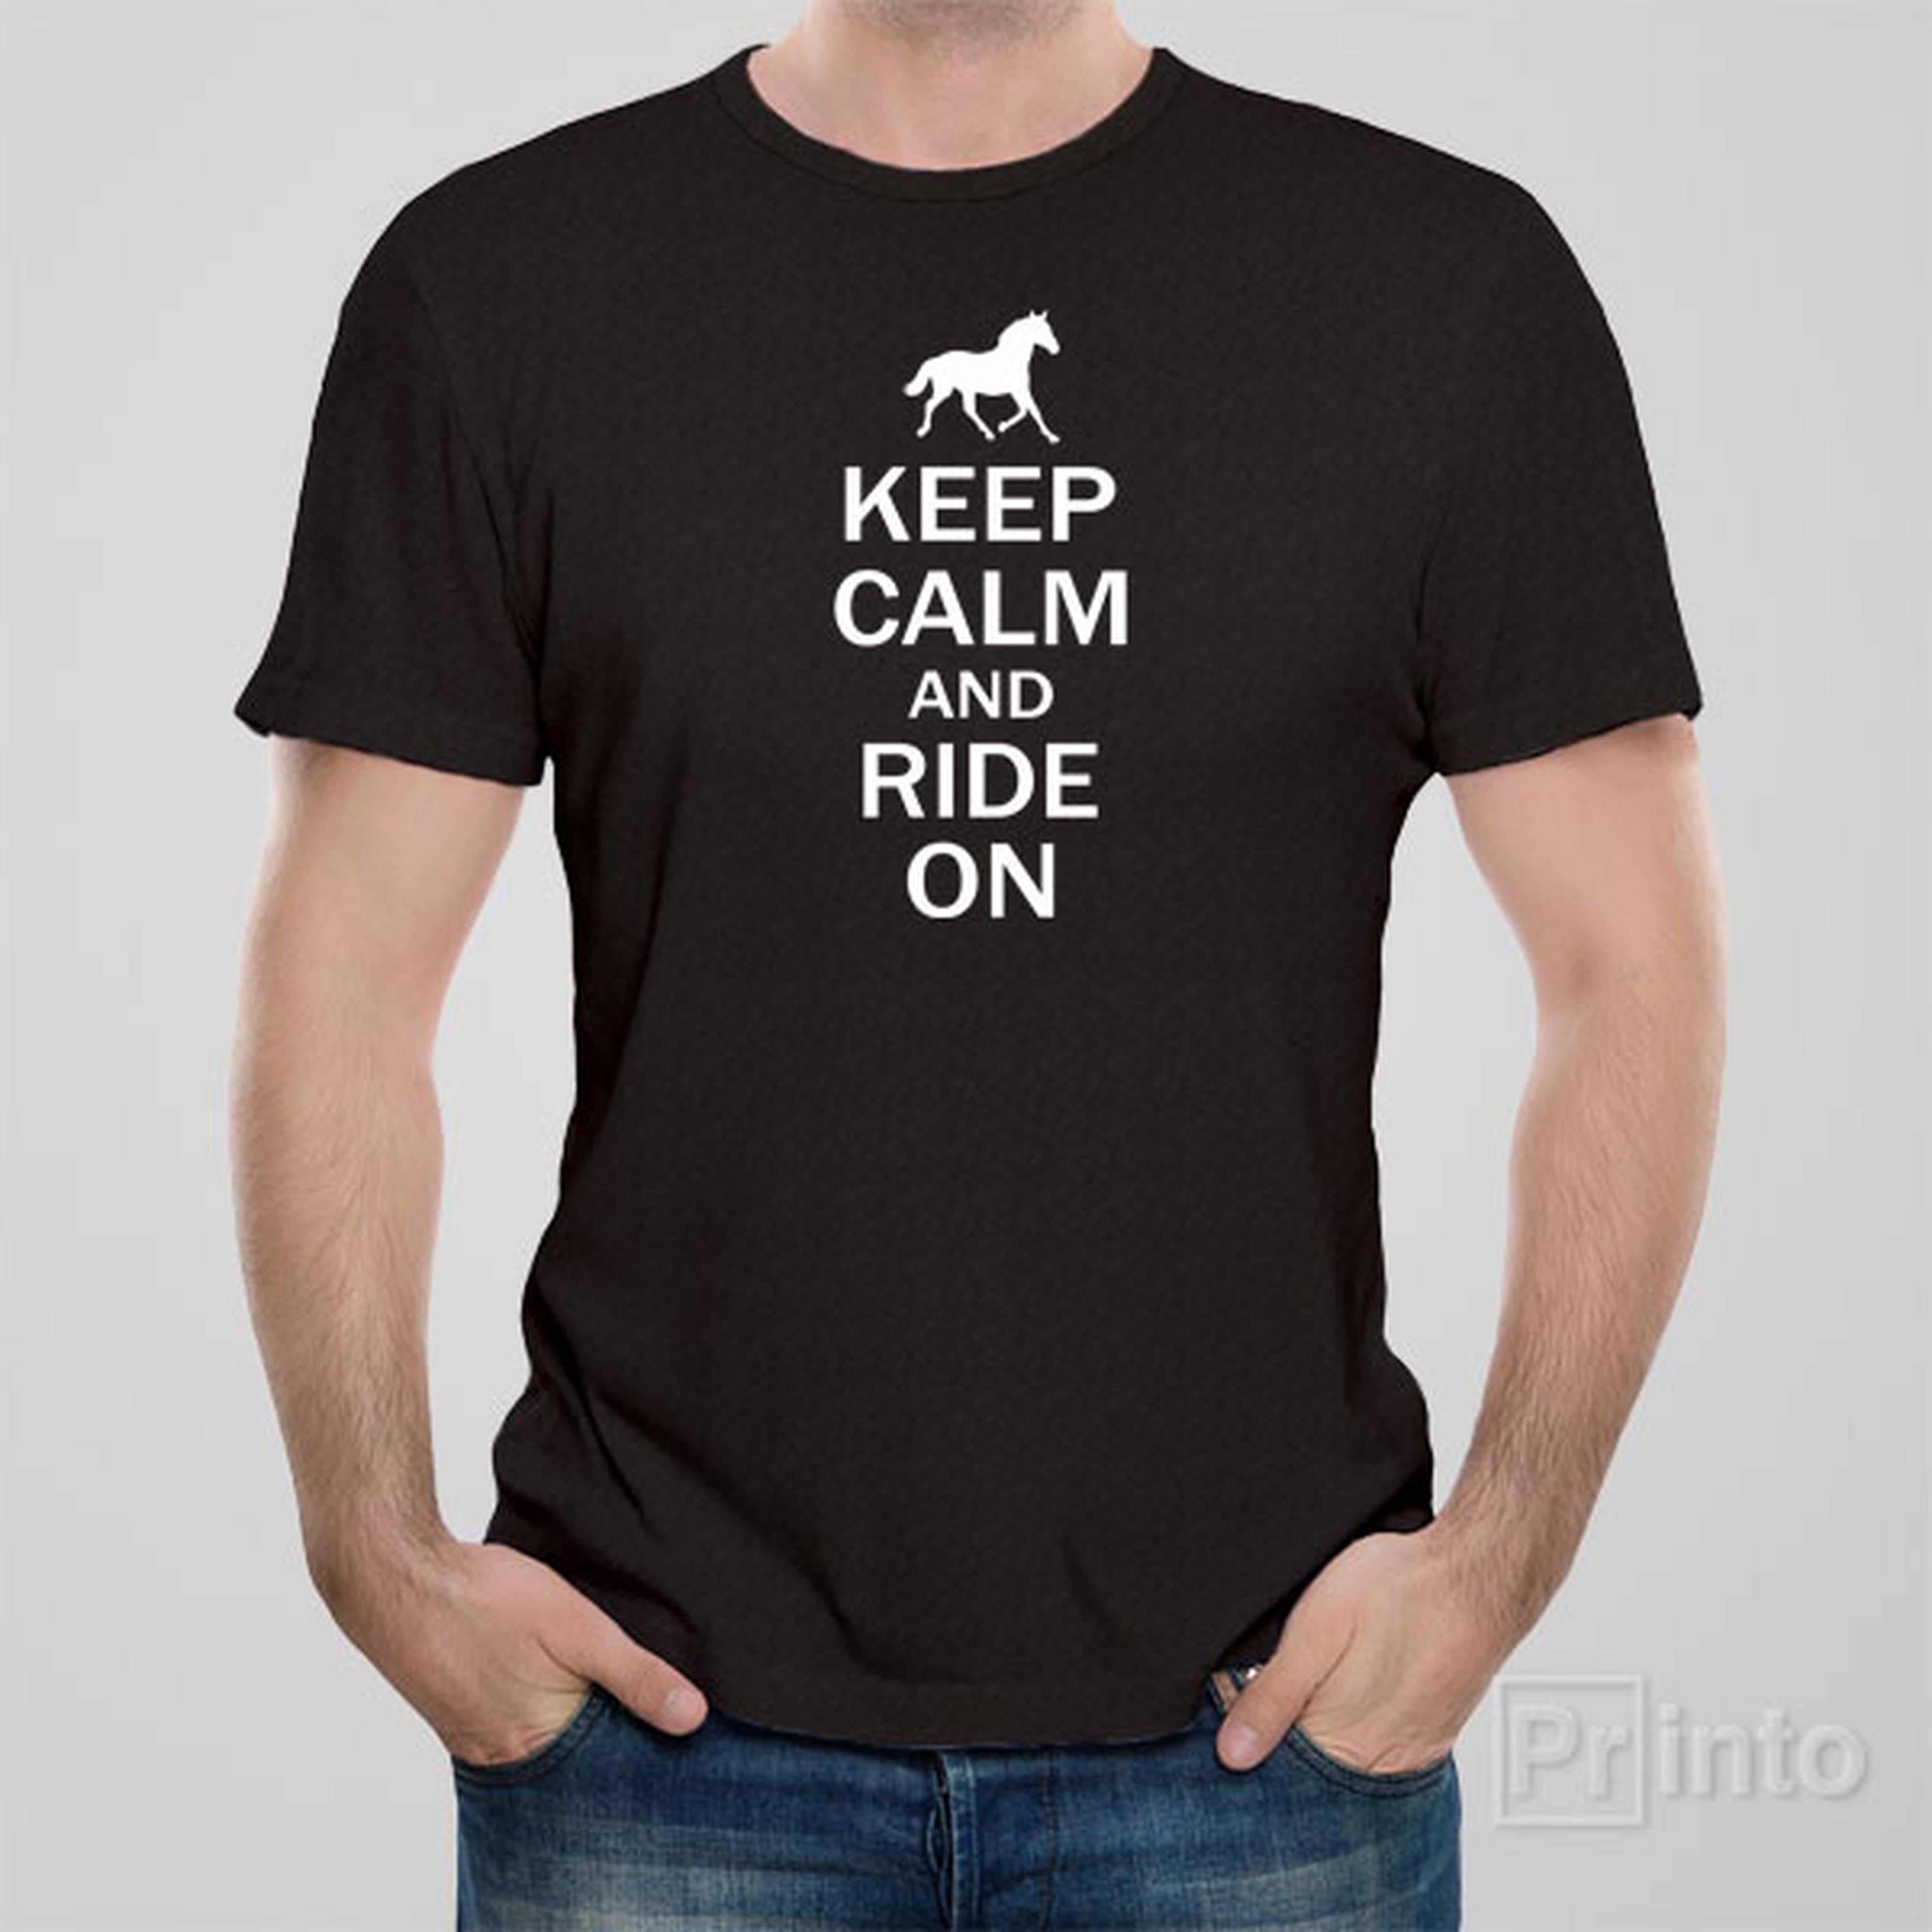 keep-calm-and-ride-on-t-shirt